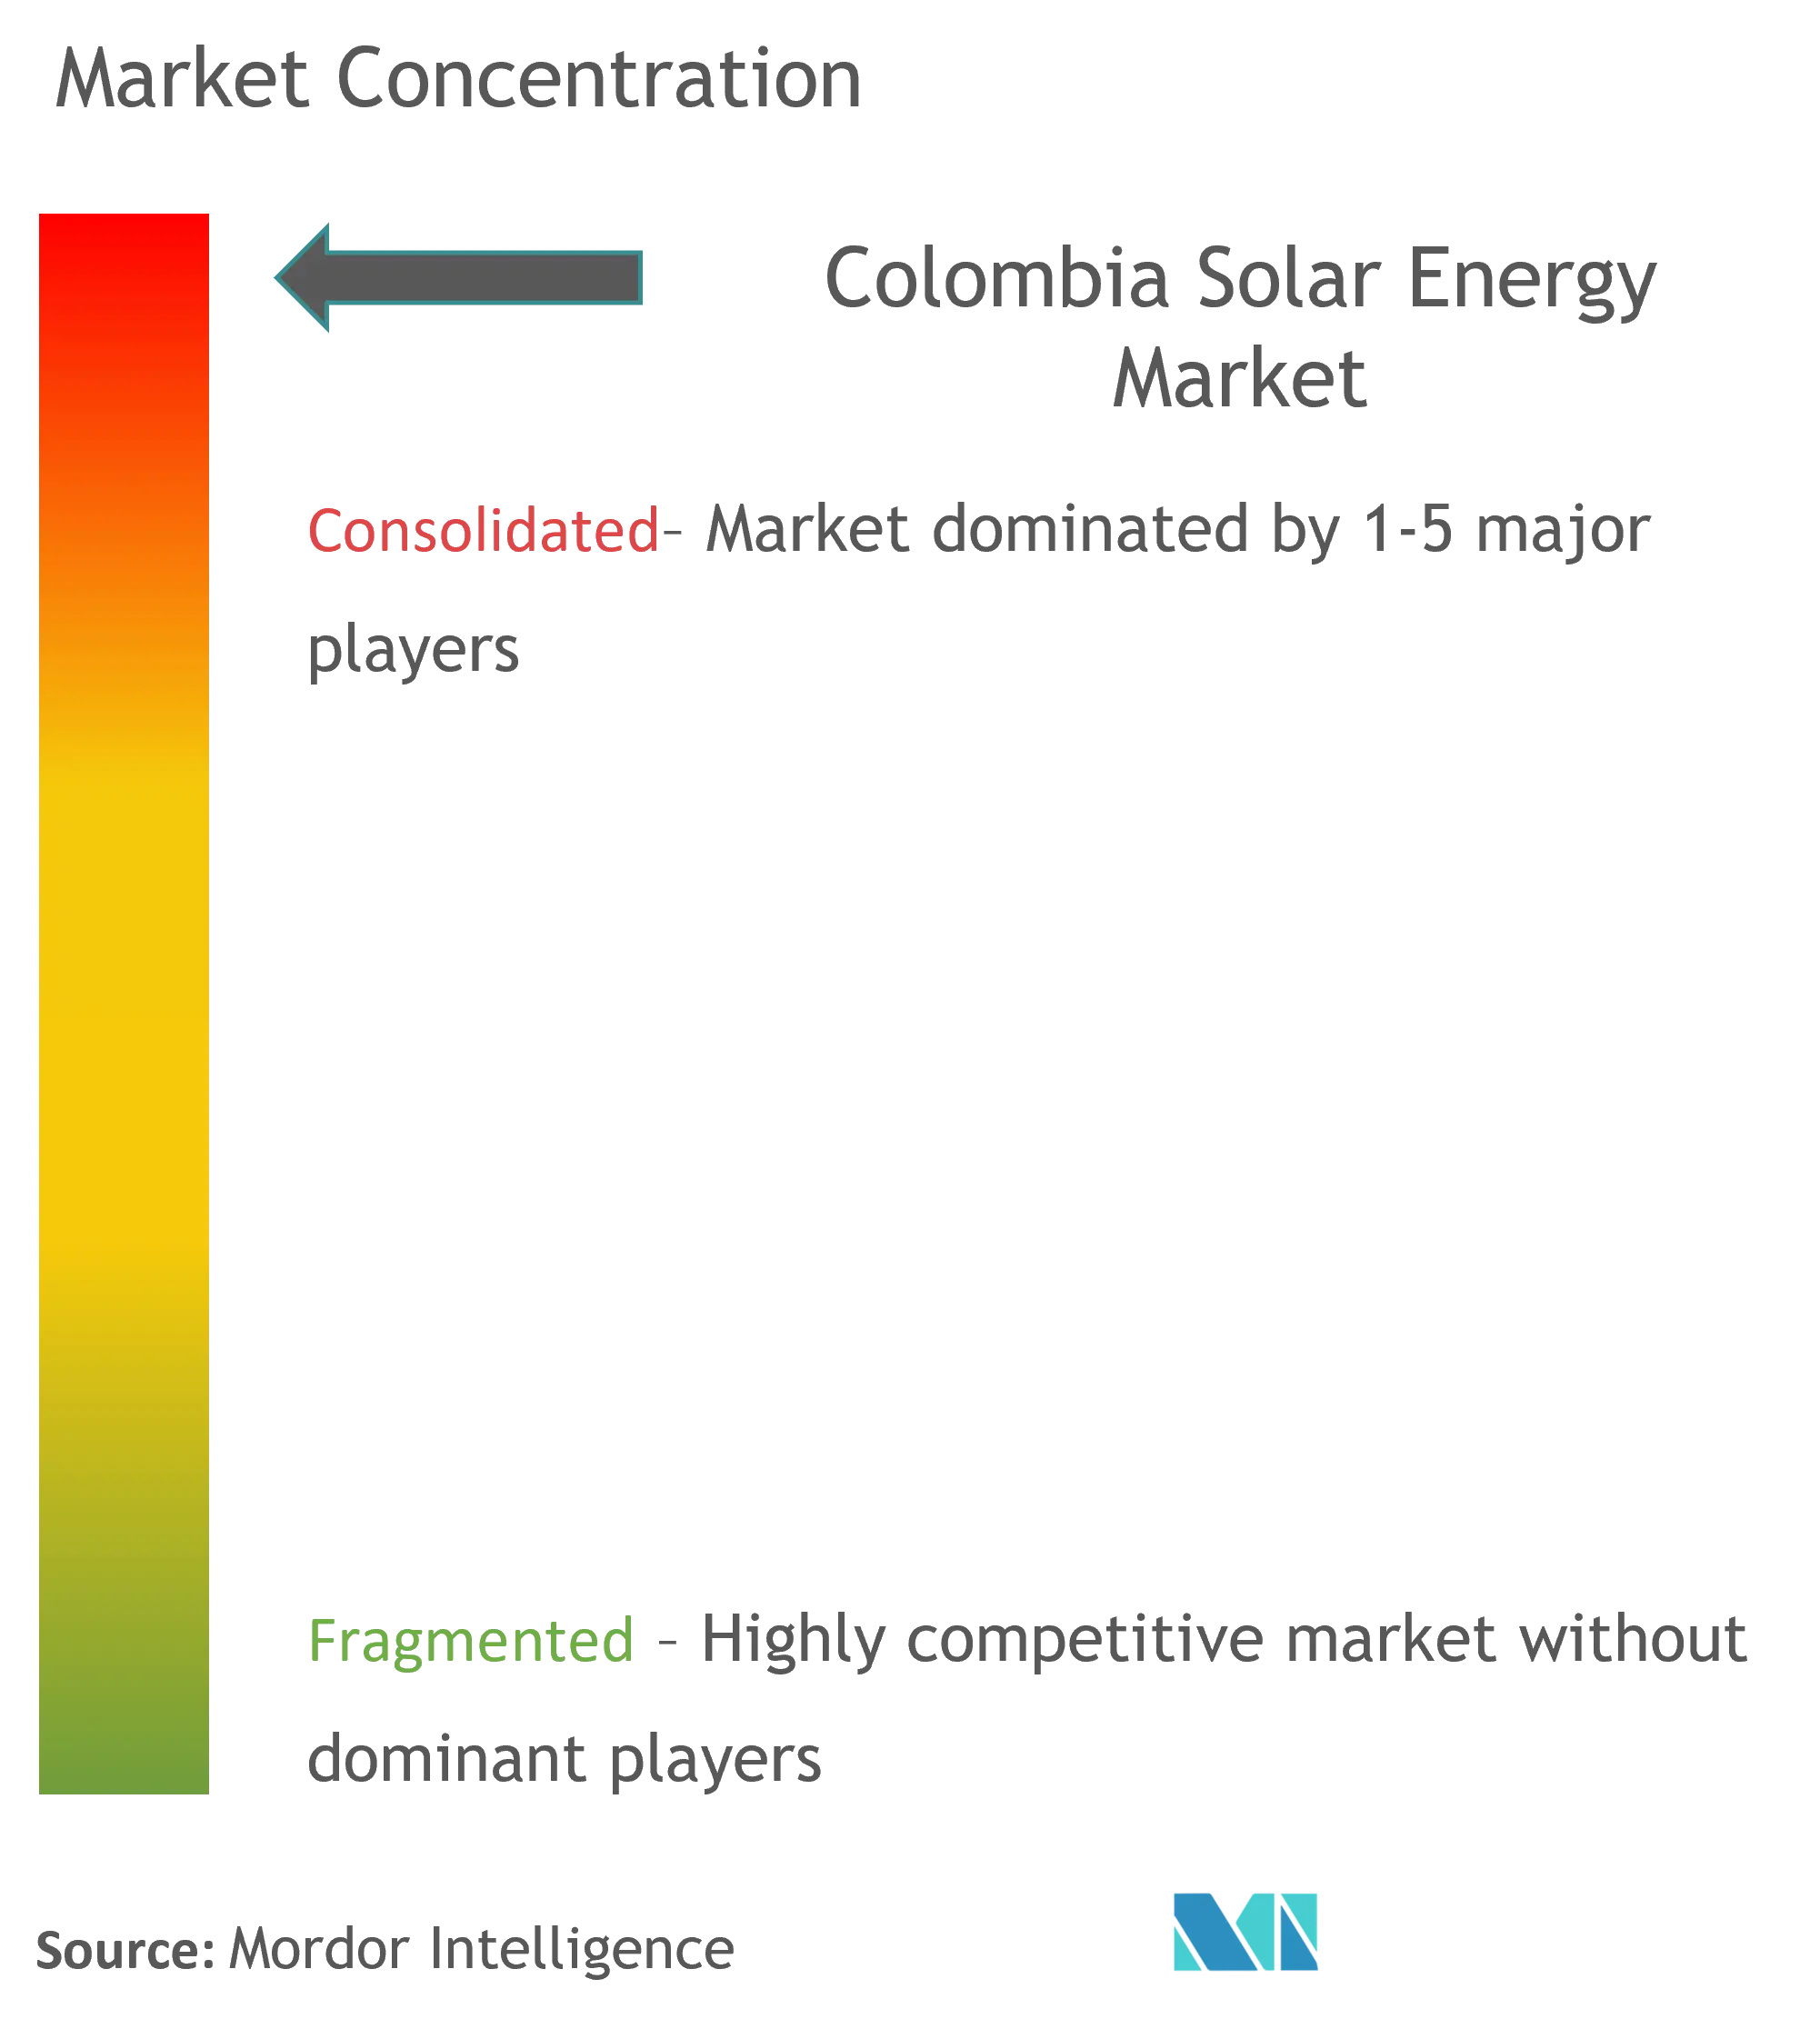 Colombia Solar Energy Market Concentration